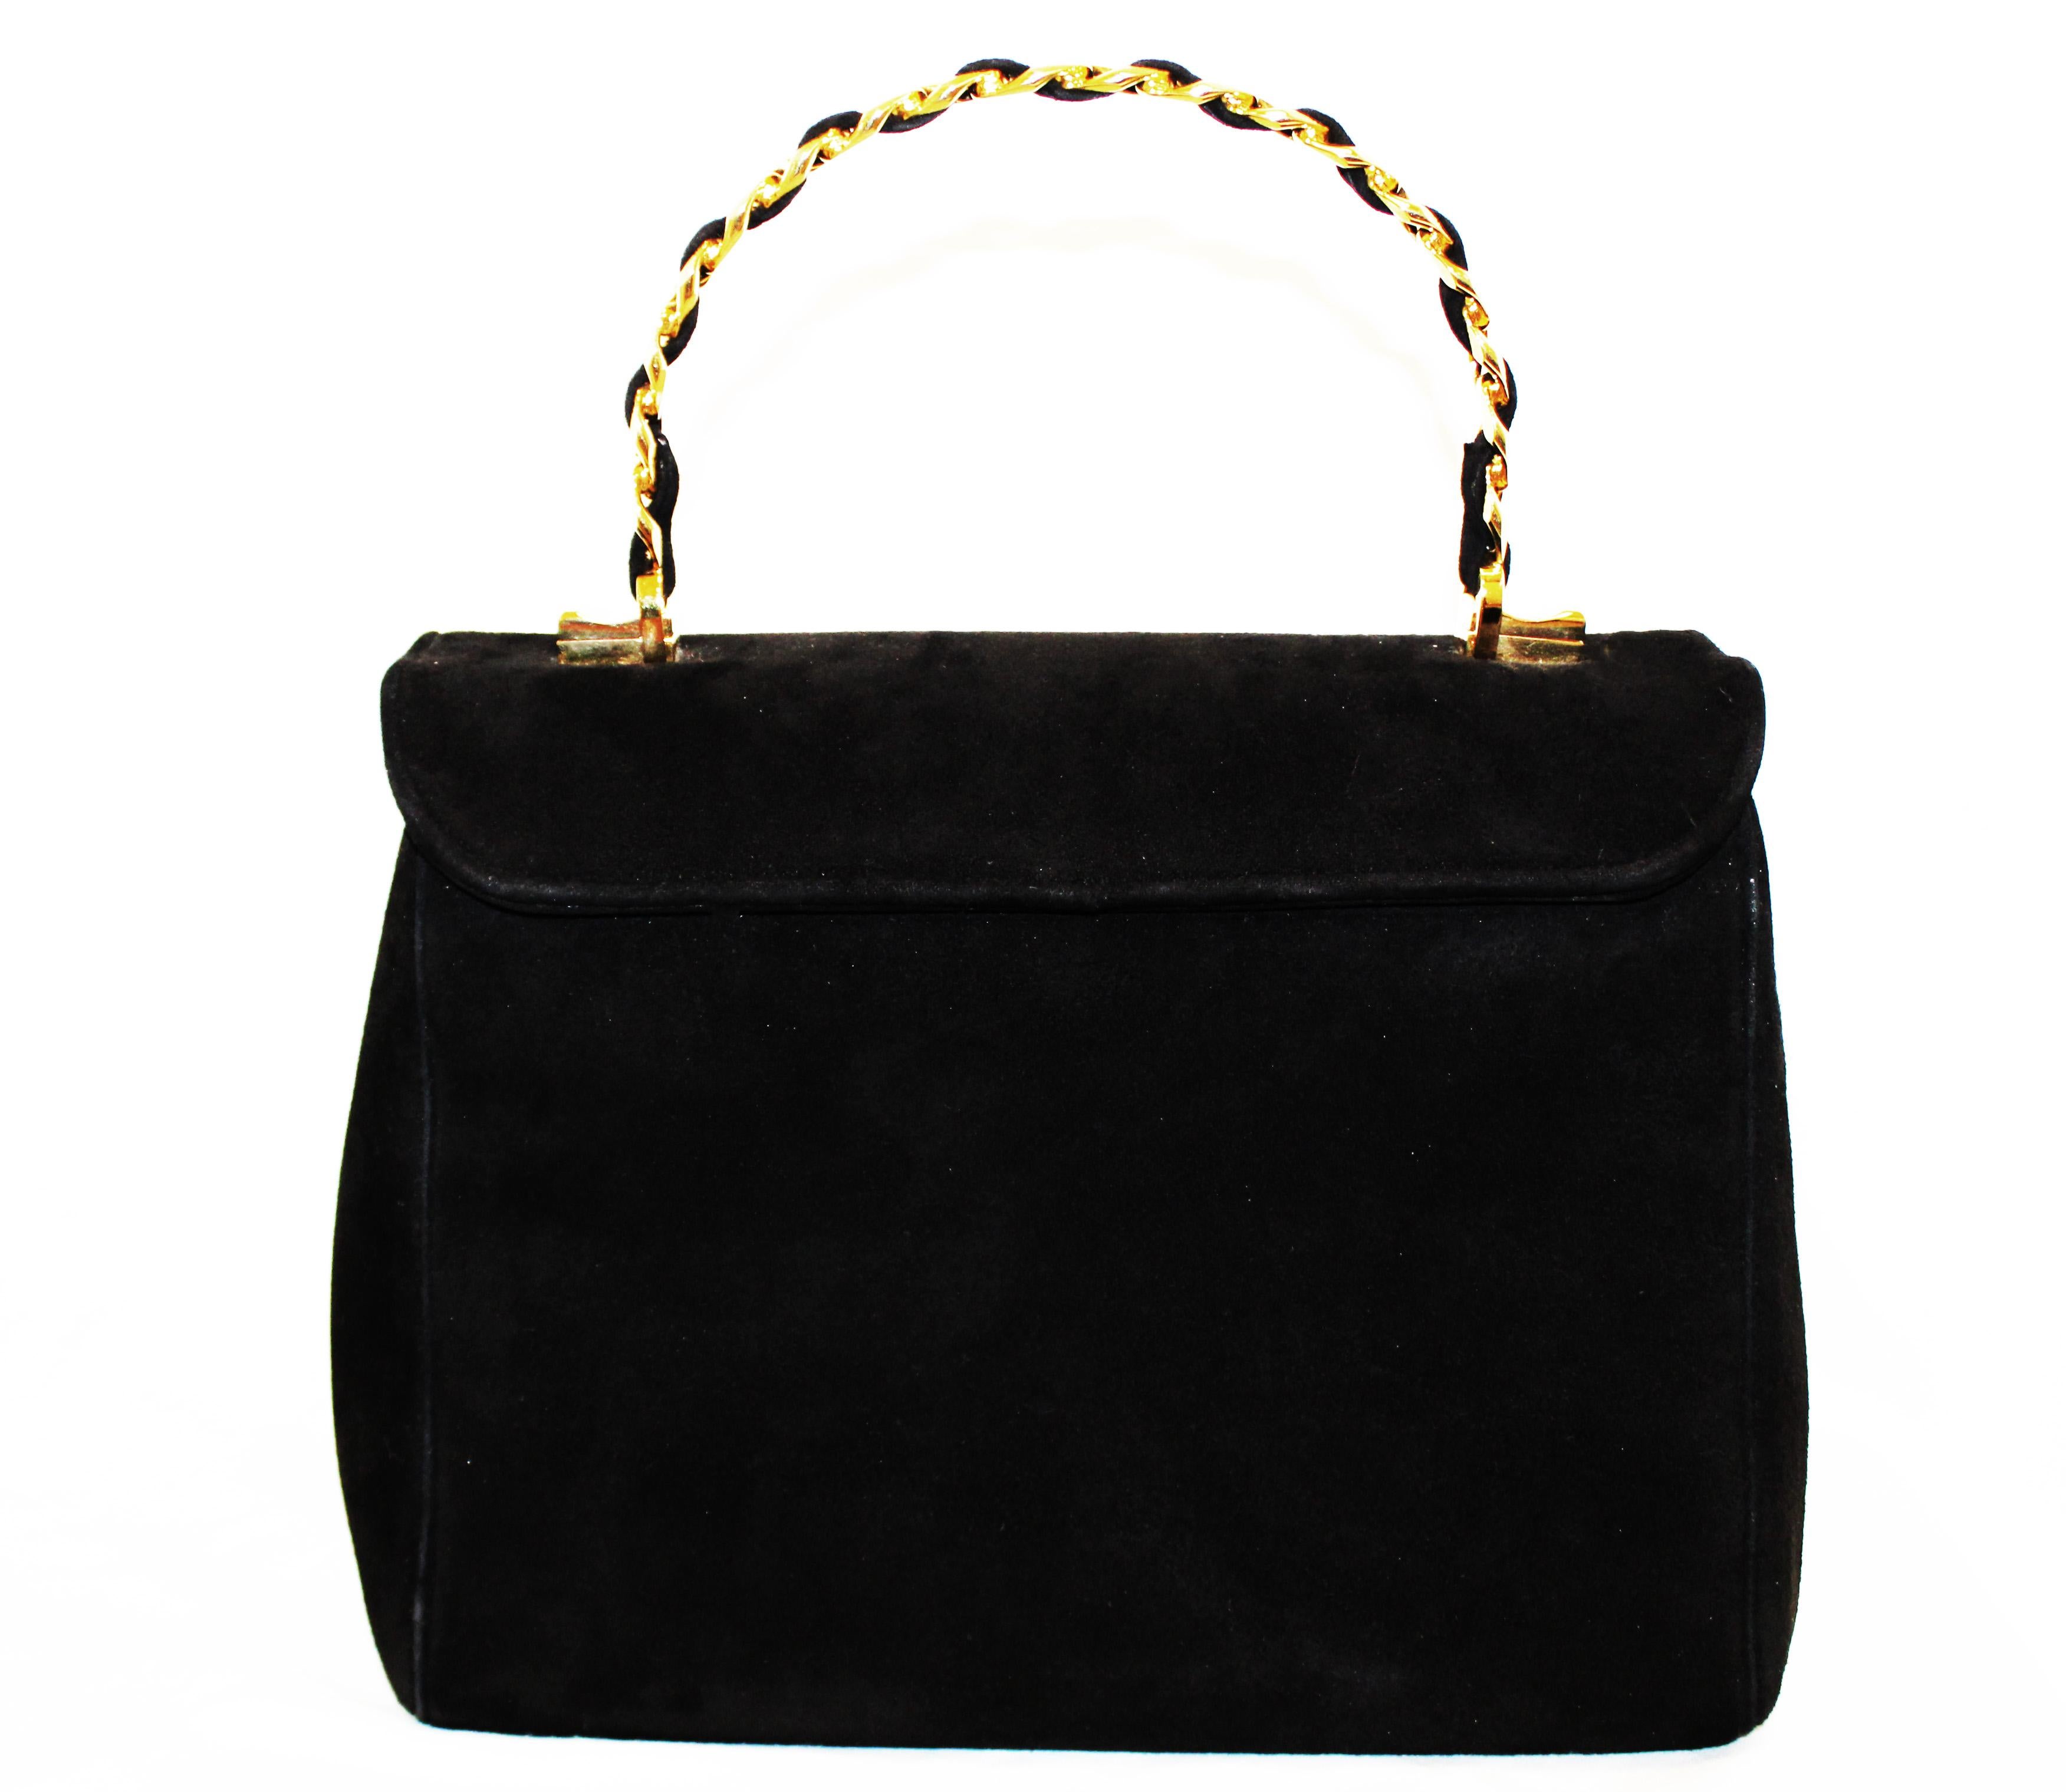 Judith Leiber Black Suede Karung W/ Structured Top Handle Bag In Excellent Condition For Sale In Palm Beach, FL